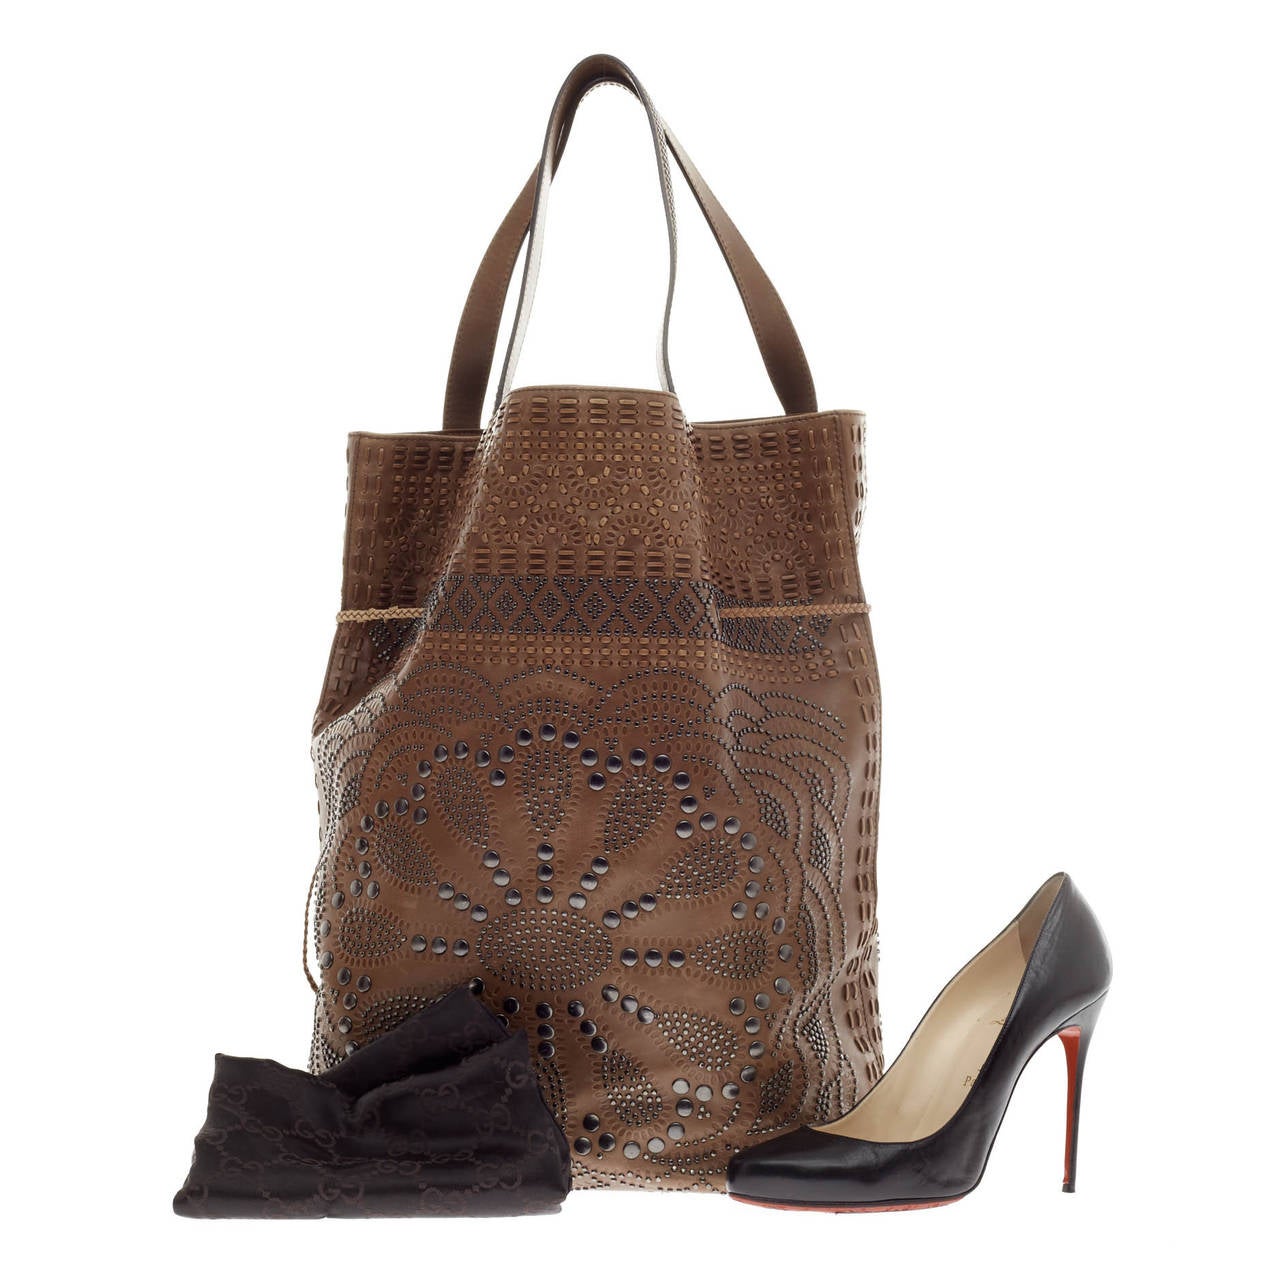 This authentic Gucci Studded Drawstring Hobo Leather showcases a vintage western-inspired style with a feminine twist. Crafted from supple brown leather, this drawstring hobo features antique floral stud detailing, stitched accents and a cinched